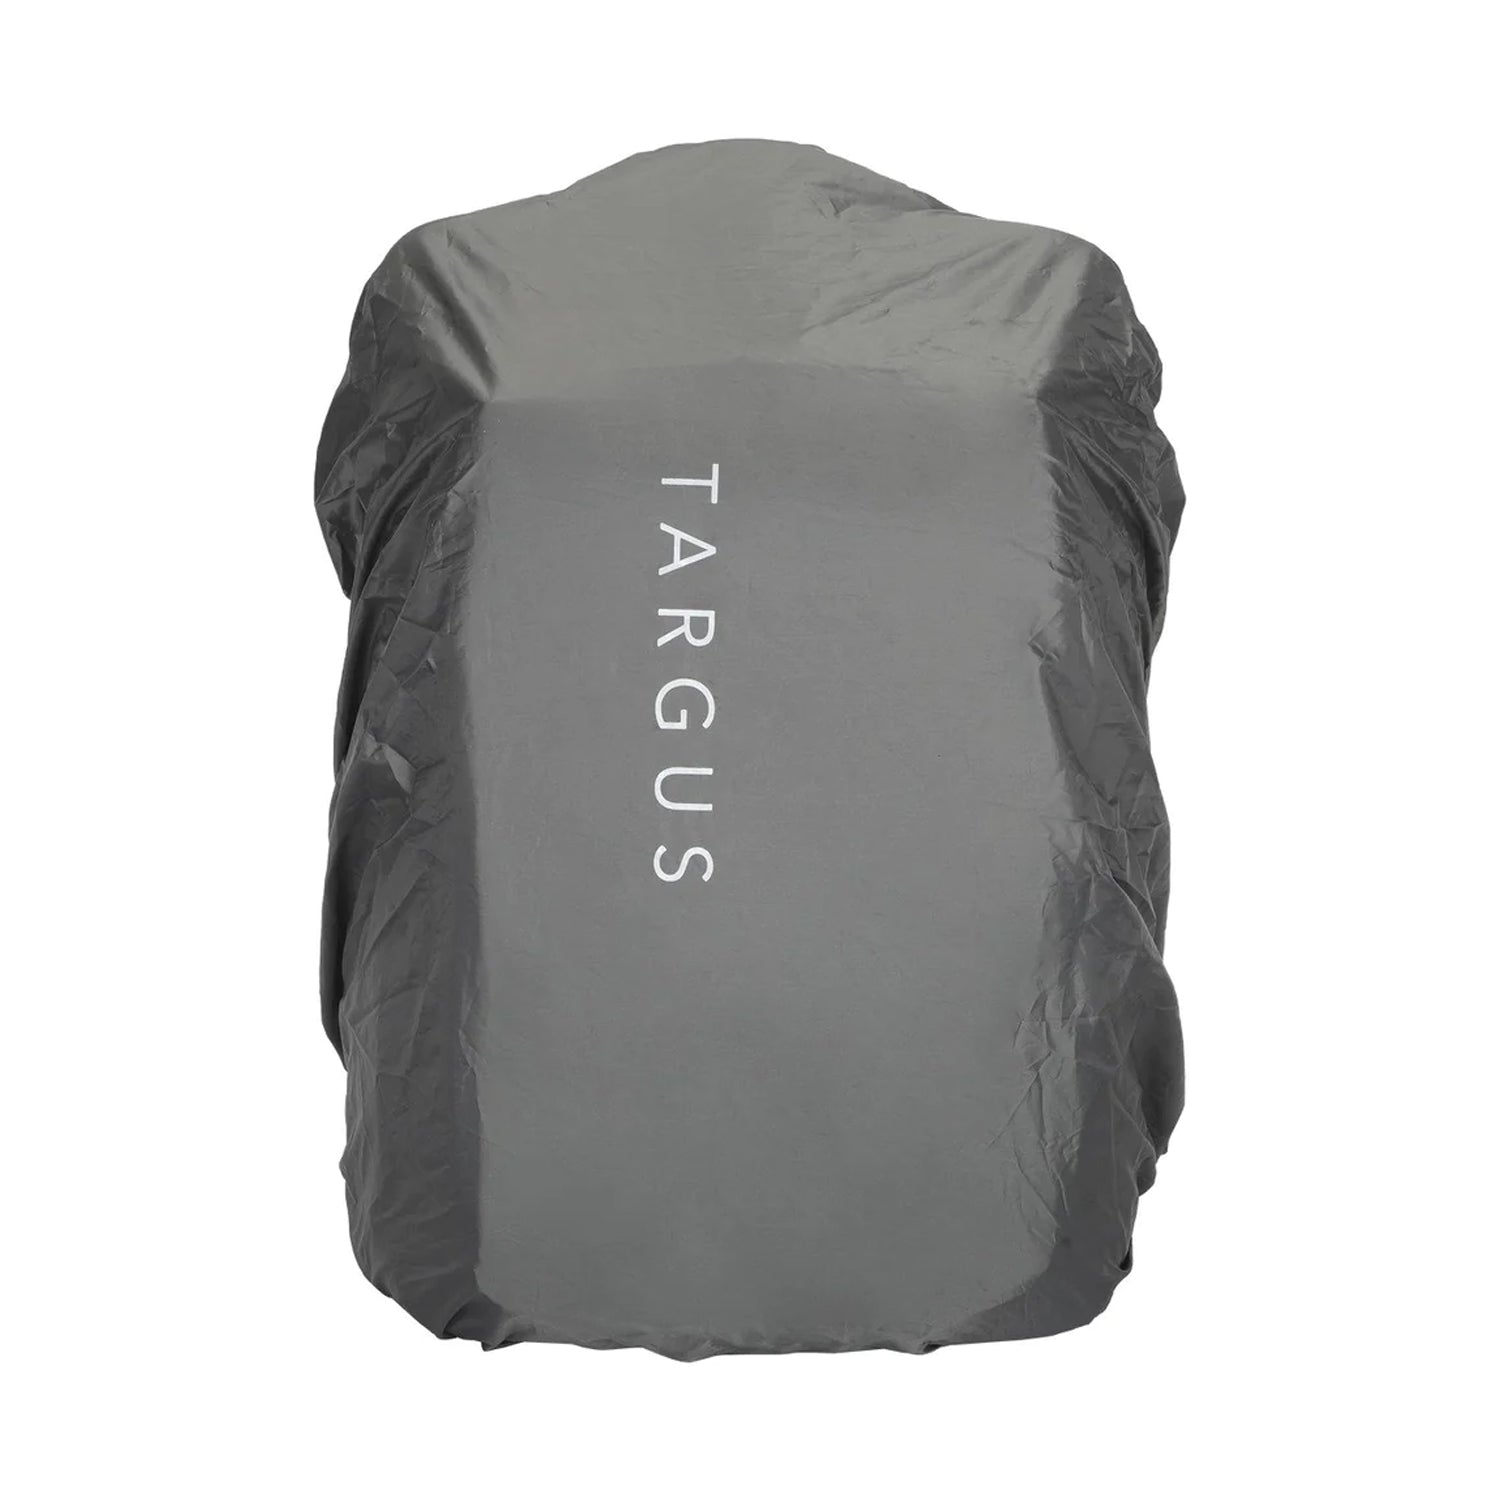 Targus AntiMicrobial 2Office 15" - 17.3" Backpack